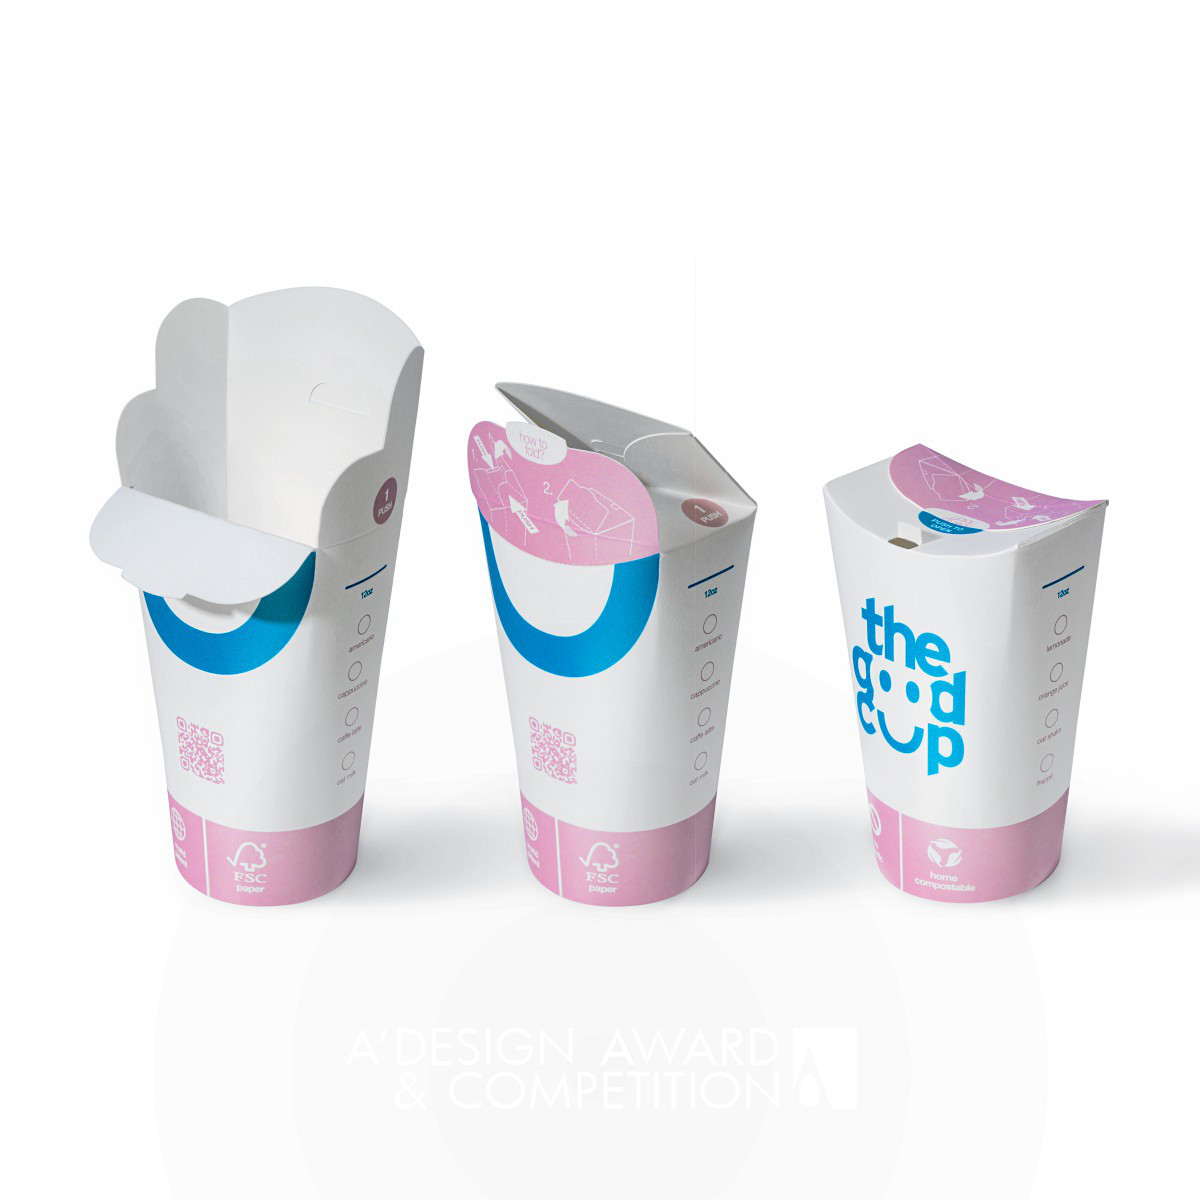 The Good Cup Sustainable Packaging by Cyril Drouet